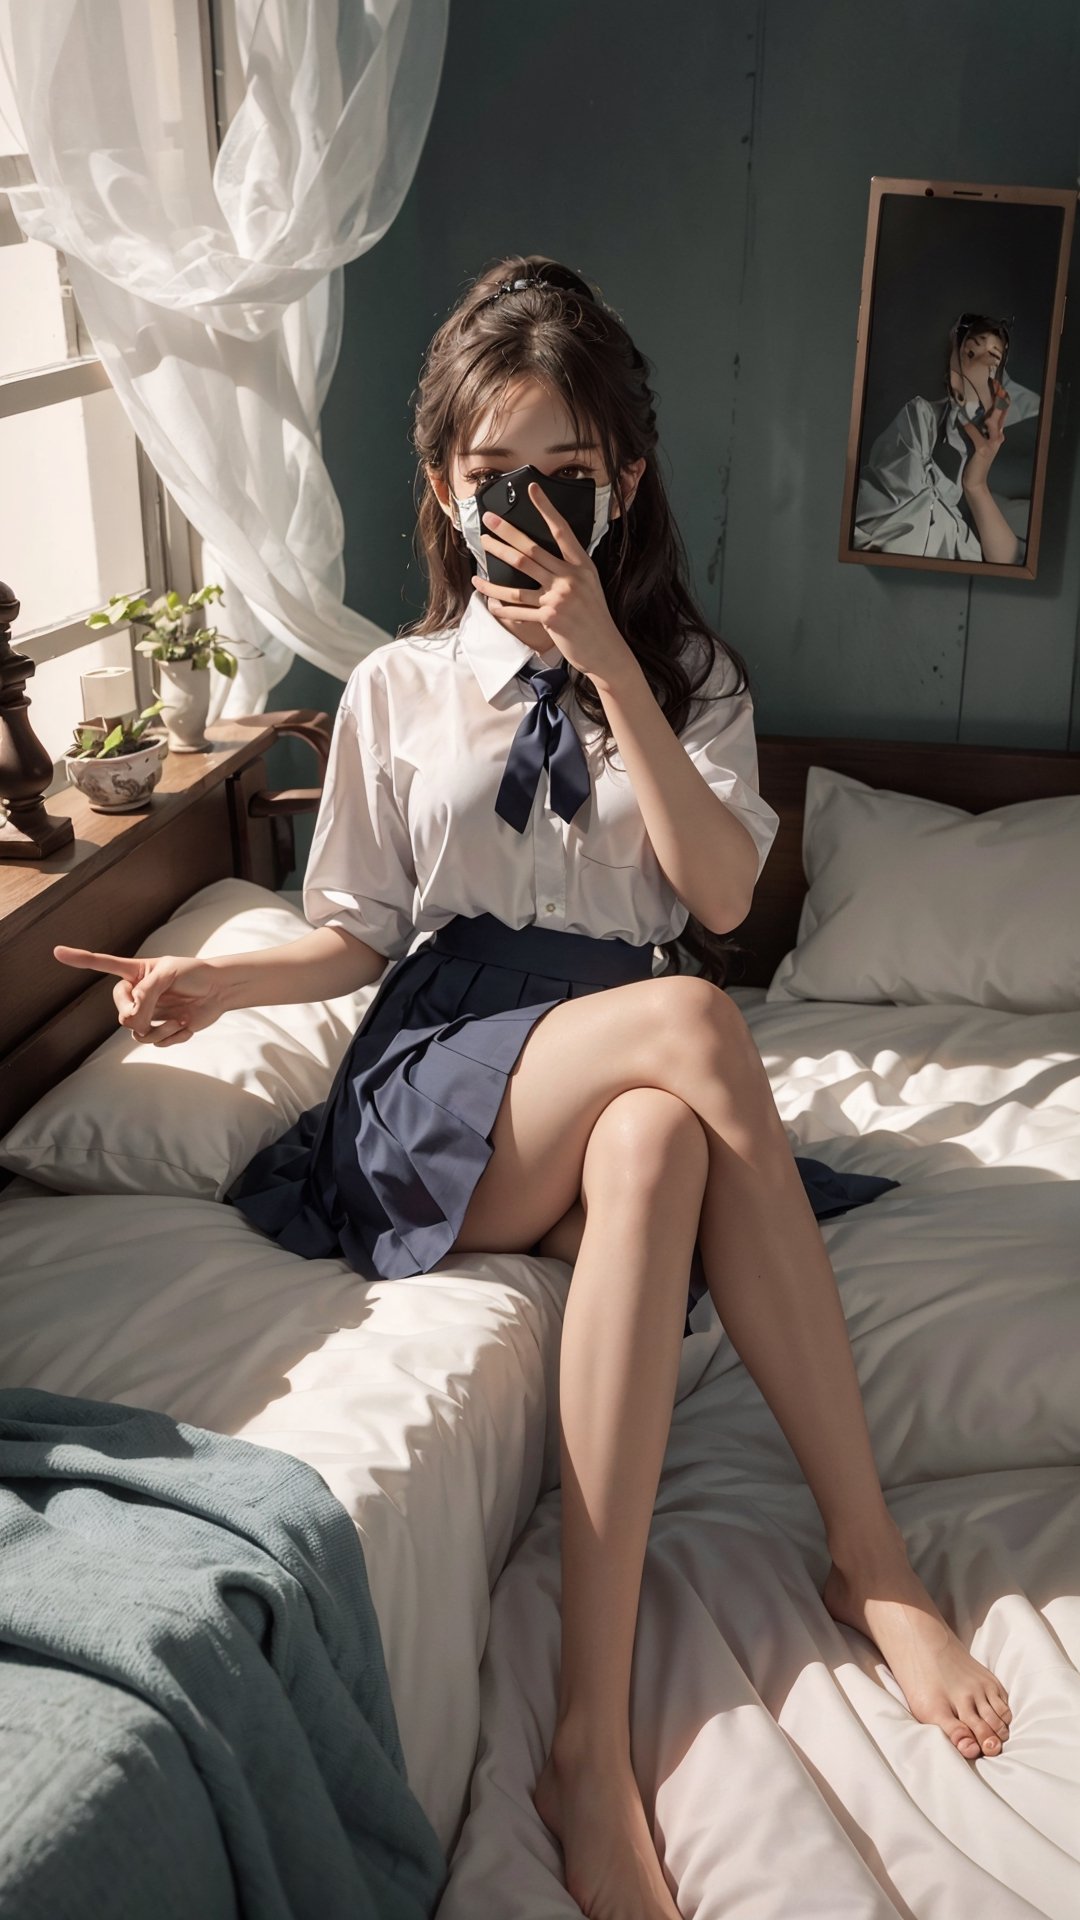 photorealistic, masterpiece, best quality, raw photo, 1girl, solo, detailed background, fine detailed, intricate detail, ray tracing, depth of field, low key, hdr, best illustrative, extremely detailed 8k cg wallpaper, film grain palette, cold colors palette, dim lights, short ponytail, bangs, selfie, perfect legs, selfie, phone, holding a phone, take a selfie with phone covering face,1 girl, fully covered face, skinny, perfect fingers, white skin, large breasts, huge breasts, perfect hands, perfect arms, expert shading, phone covering face, casual dress, pose, selfie pose, gesture, gesturing, full body, perfect feet,yuzu, school girl, school_uniform, collared shirt, pleated skirt, dark blue skirt, micro skirt, thighhigh, thigh high, bedroom background, surrounding objects (bedroom, bed), bed background, dynamic pose, hips up, sitting, pantyshot, panty, sitting down, sitting on bed, bare feet, thin legs, (thin legs:1.5), head of out frame, mask, facemask, wearing a facemask, covered face, peace sign, one leg over another, side view, from side, perfect hands, perfect arms, perfect legs, perfect feet, showing panties,perfect, feet out of frame, no feet, solo focus, zoom in